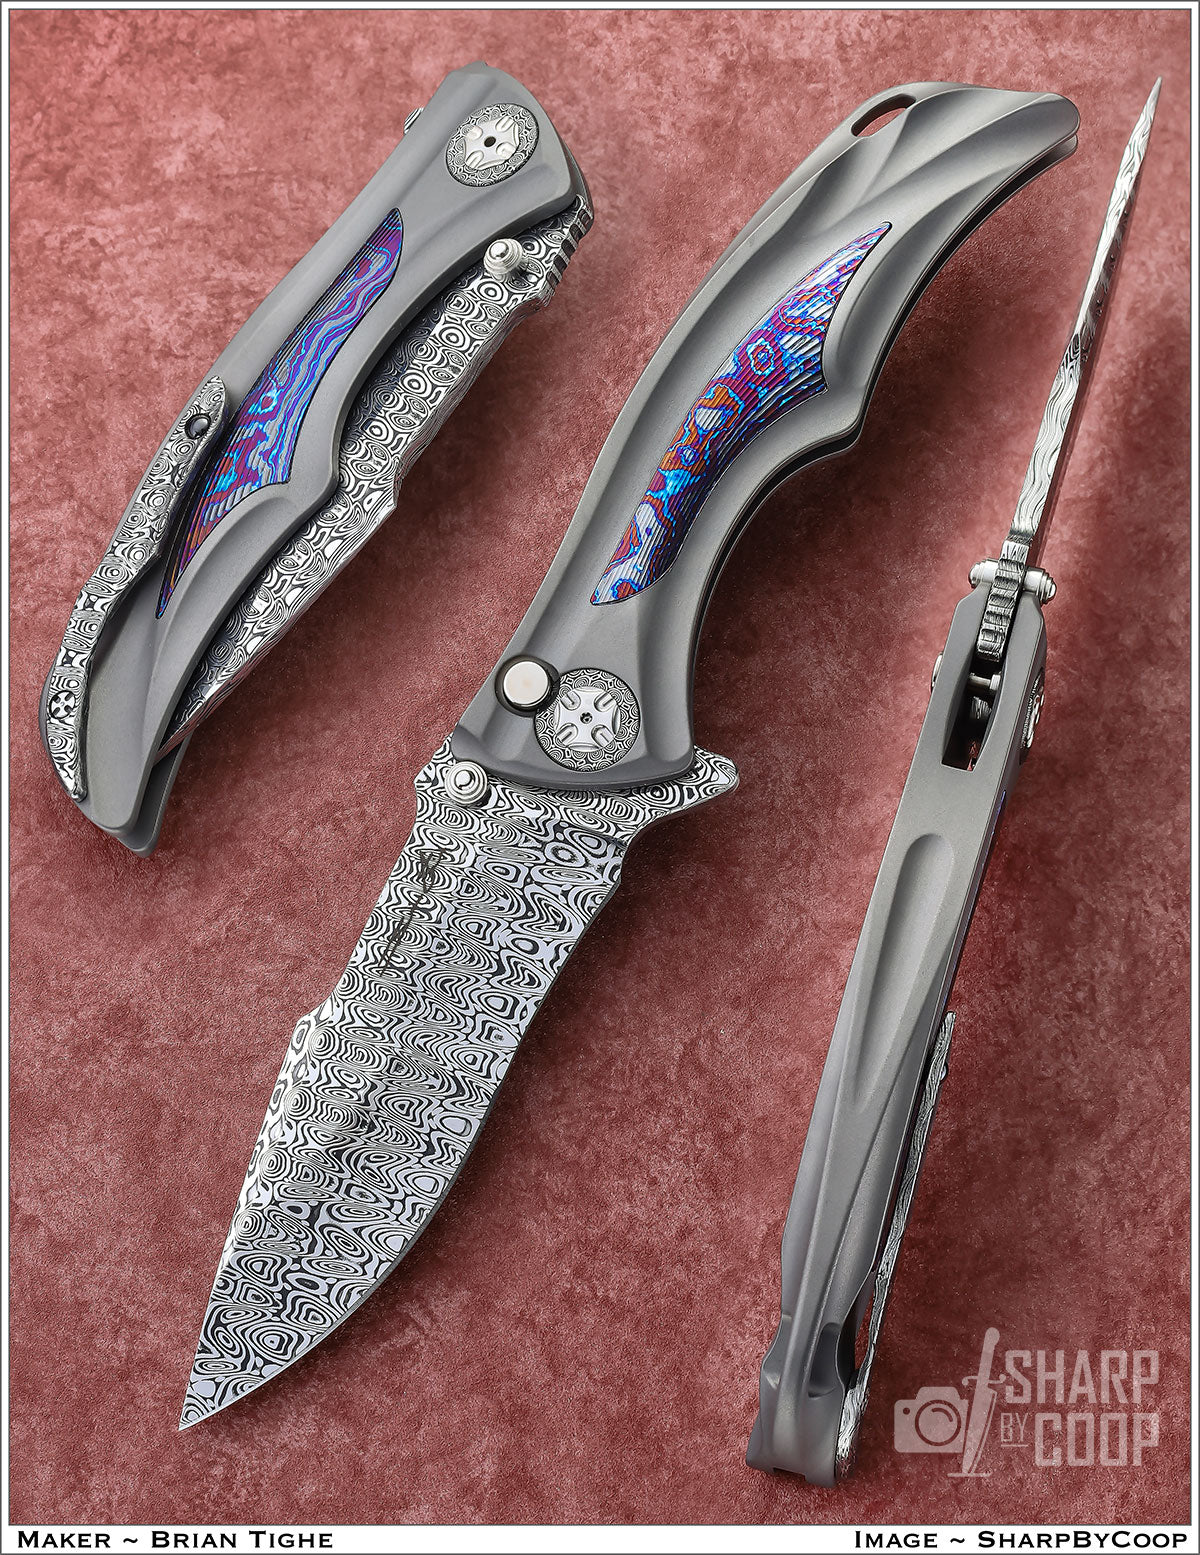 Tighe Down Titanium Integral With Damasteel Blade and Timascus Inlays.